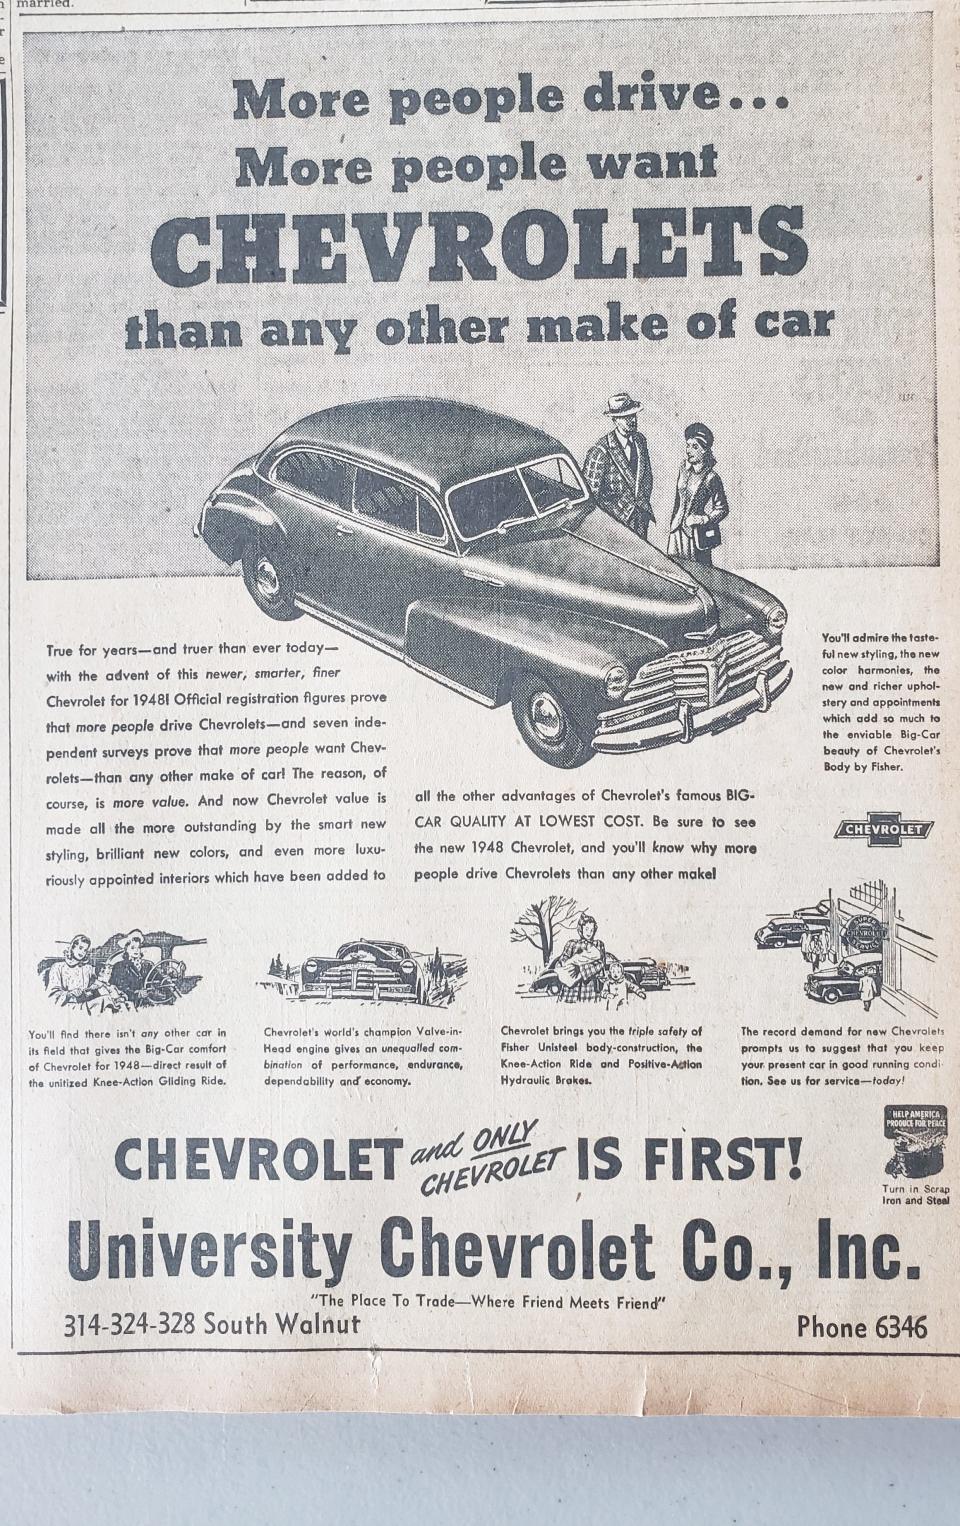 A local Chevrolet ad in 1948.